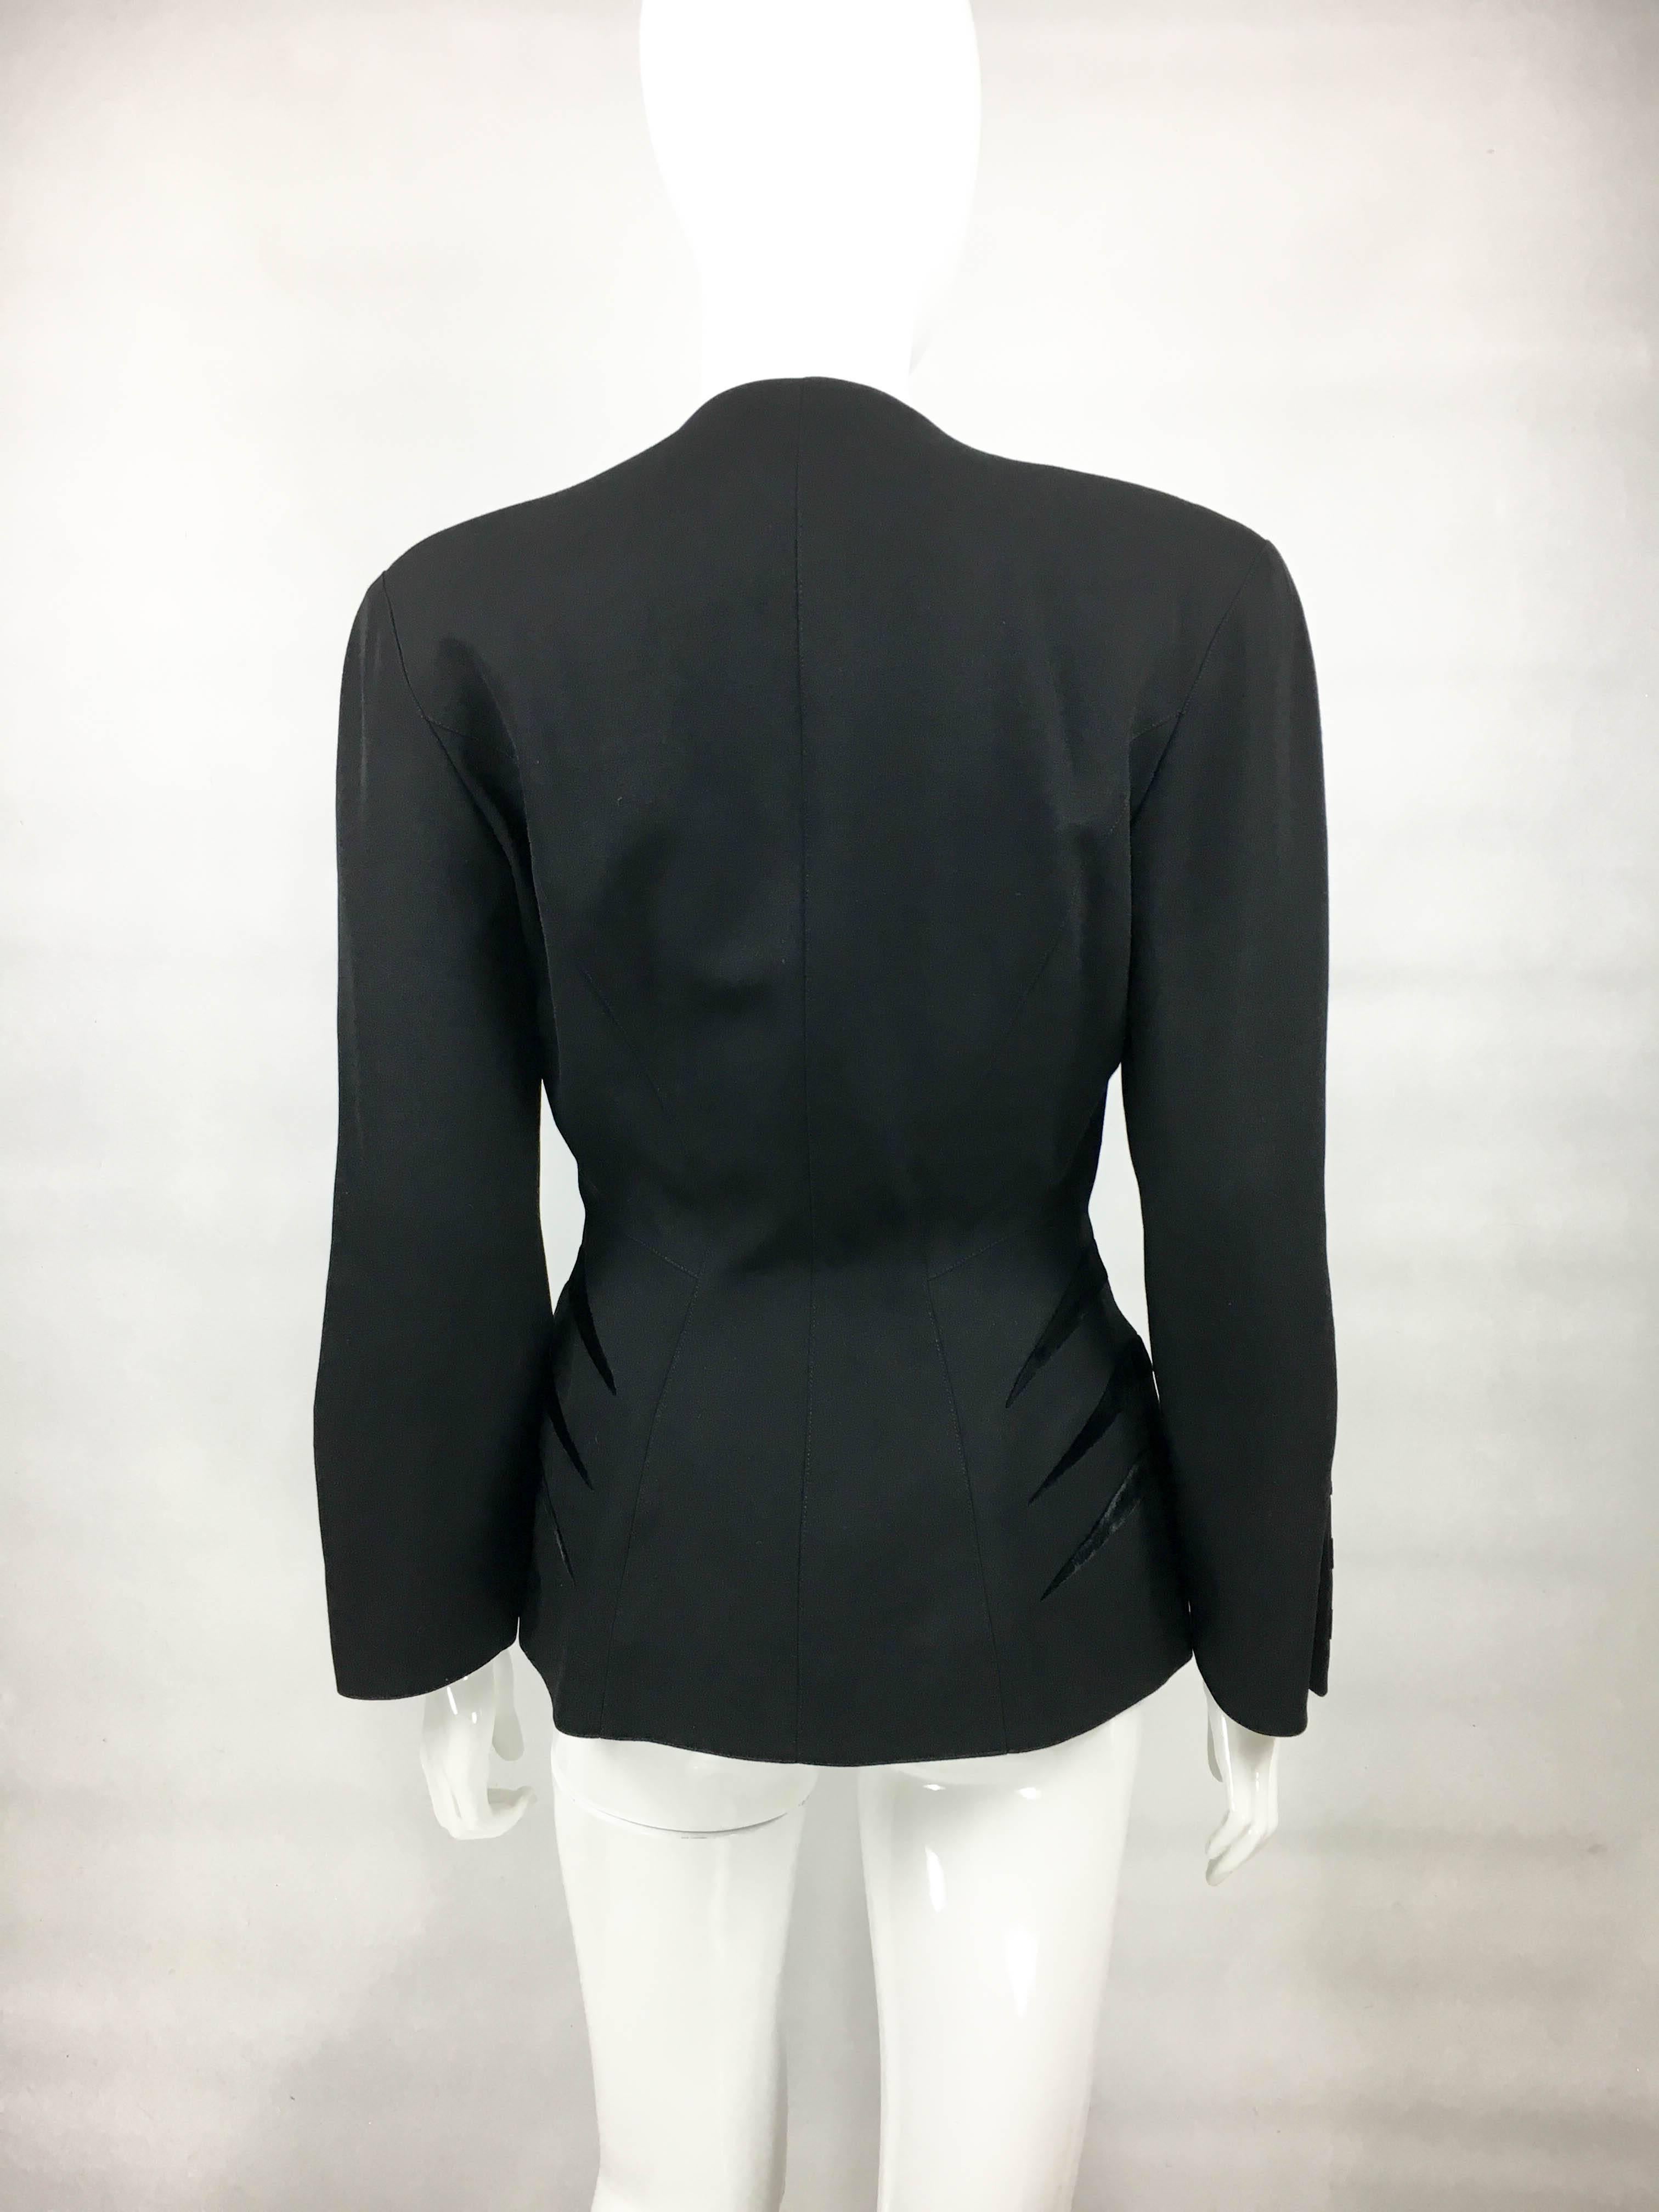 Thierry Mugler Black Wool Jacket With Velvet Details, 1980s  5